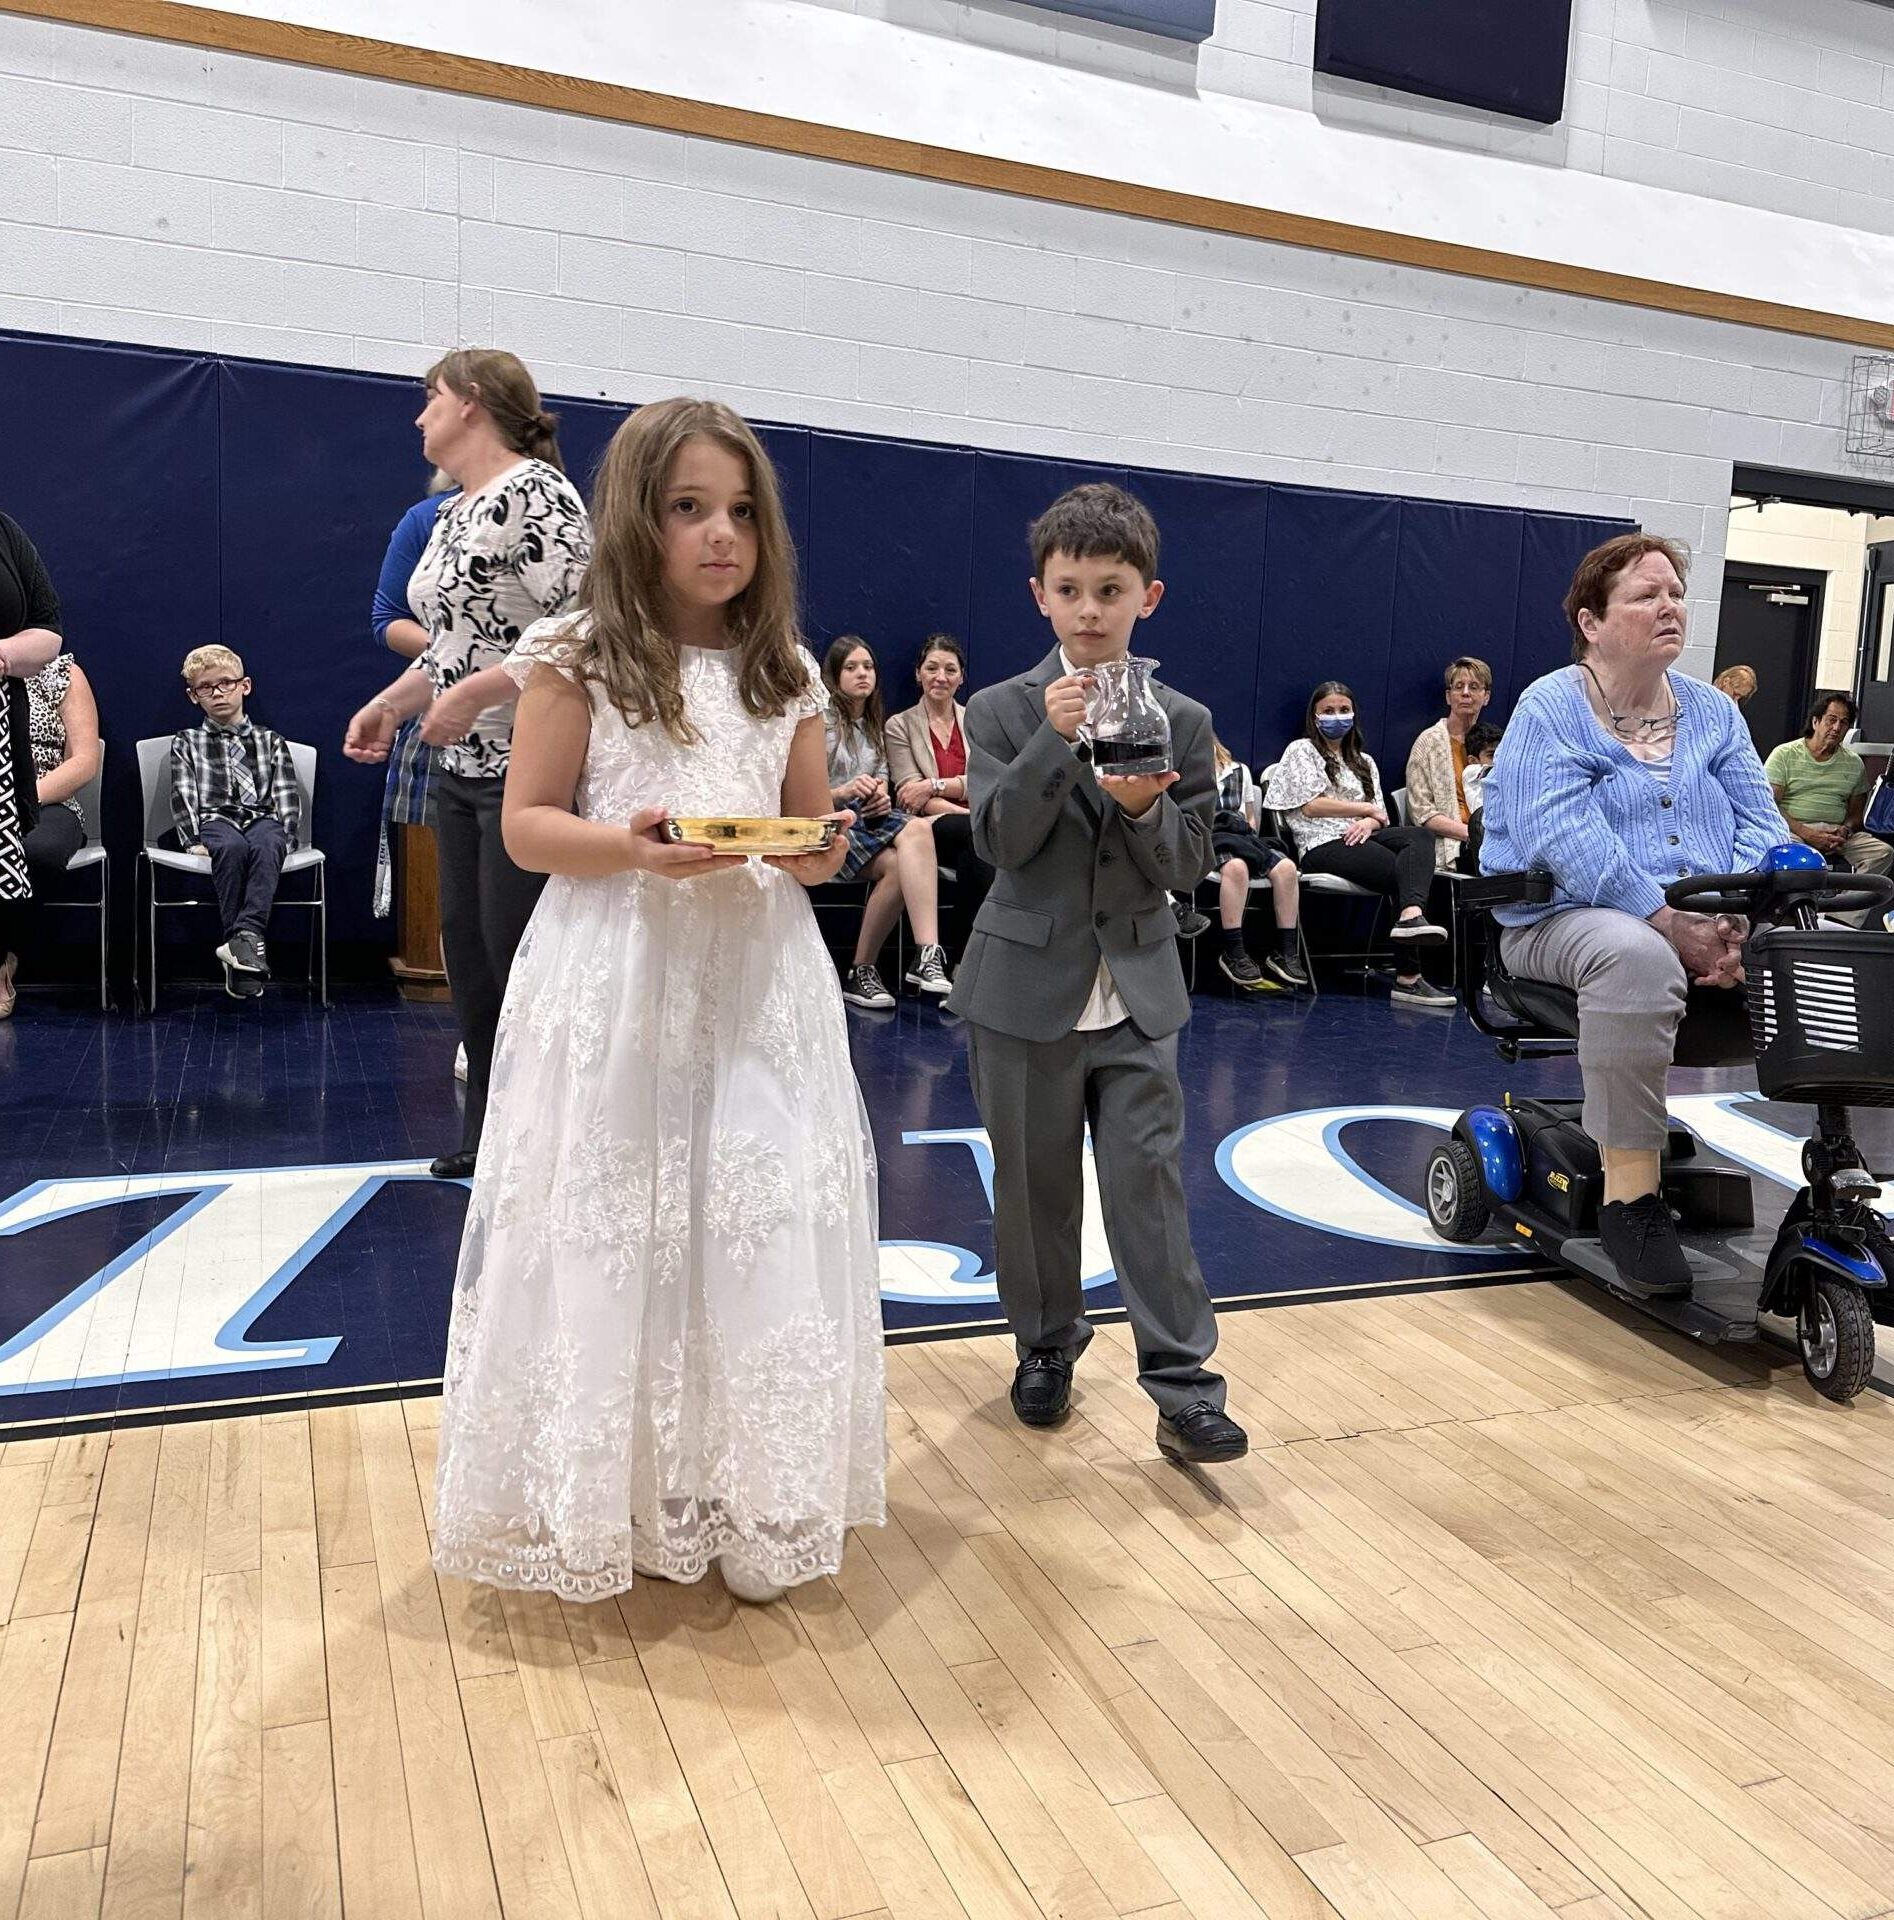 Young boy and girl in first holy communion attire bring forward the gifts during the offertory.